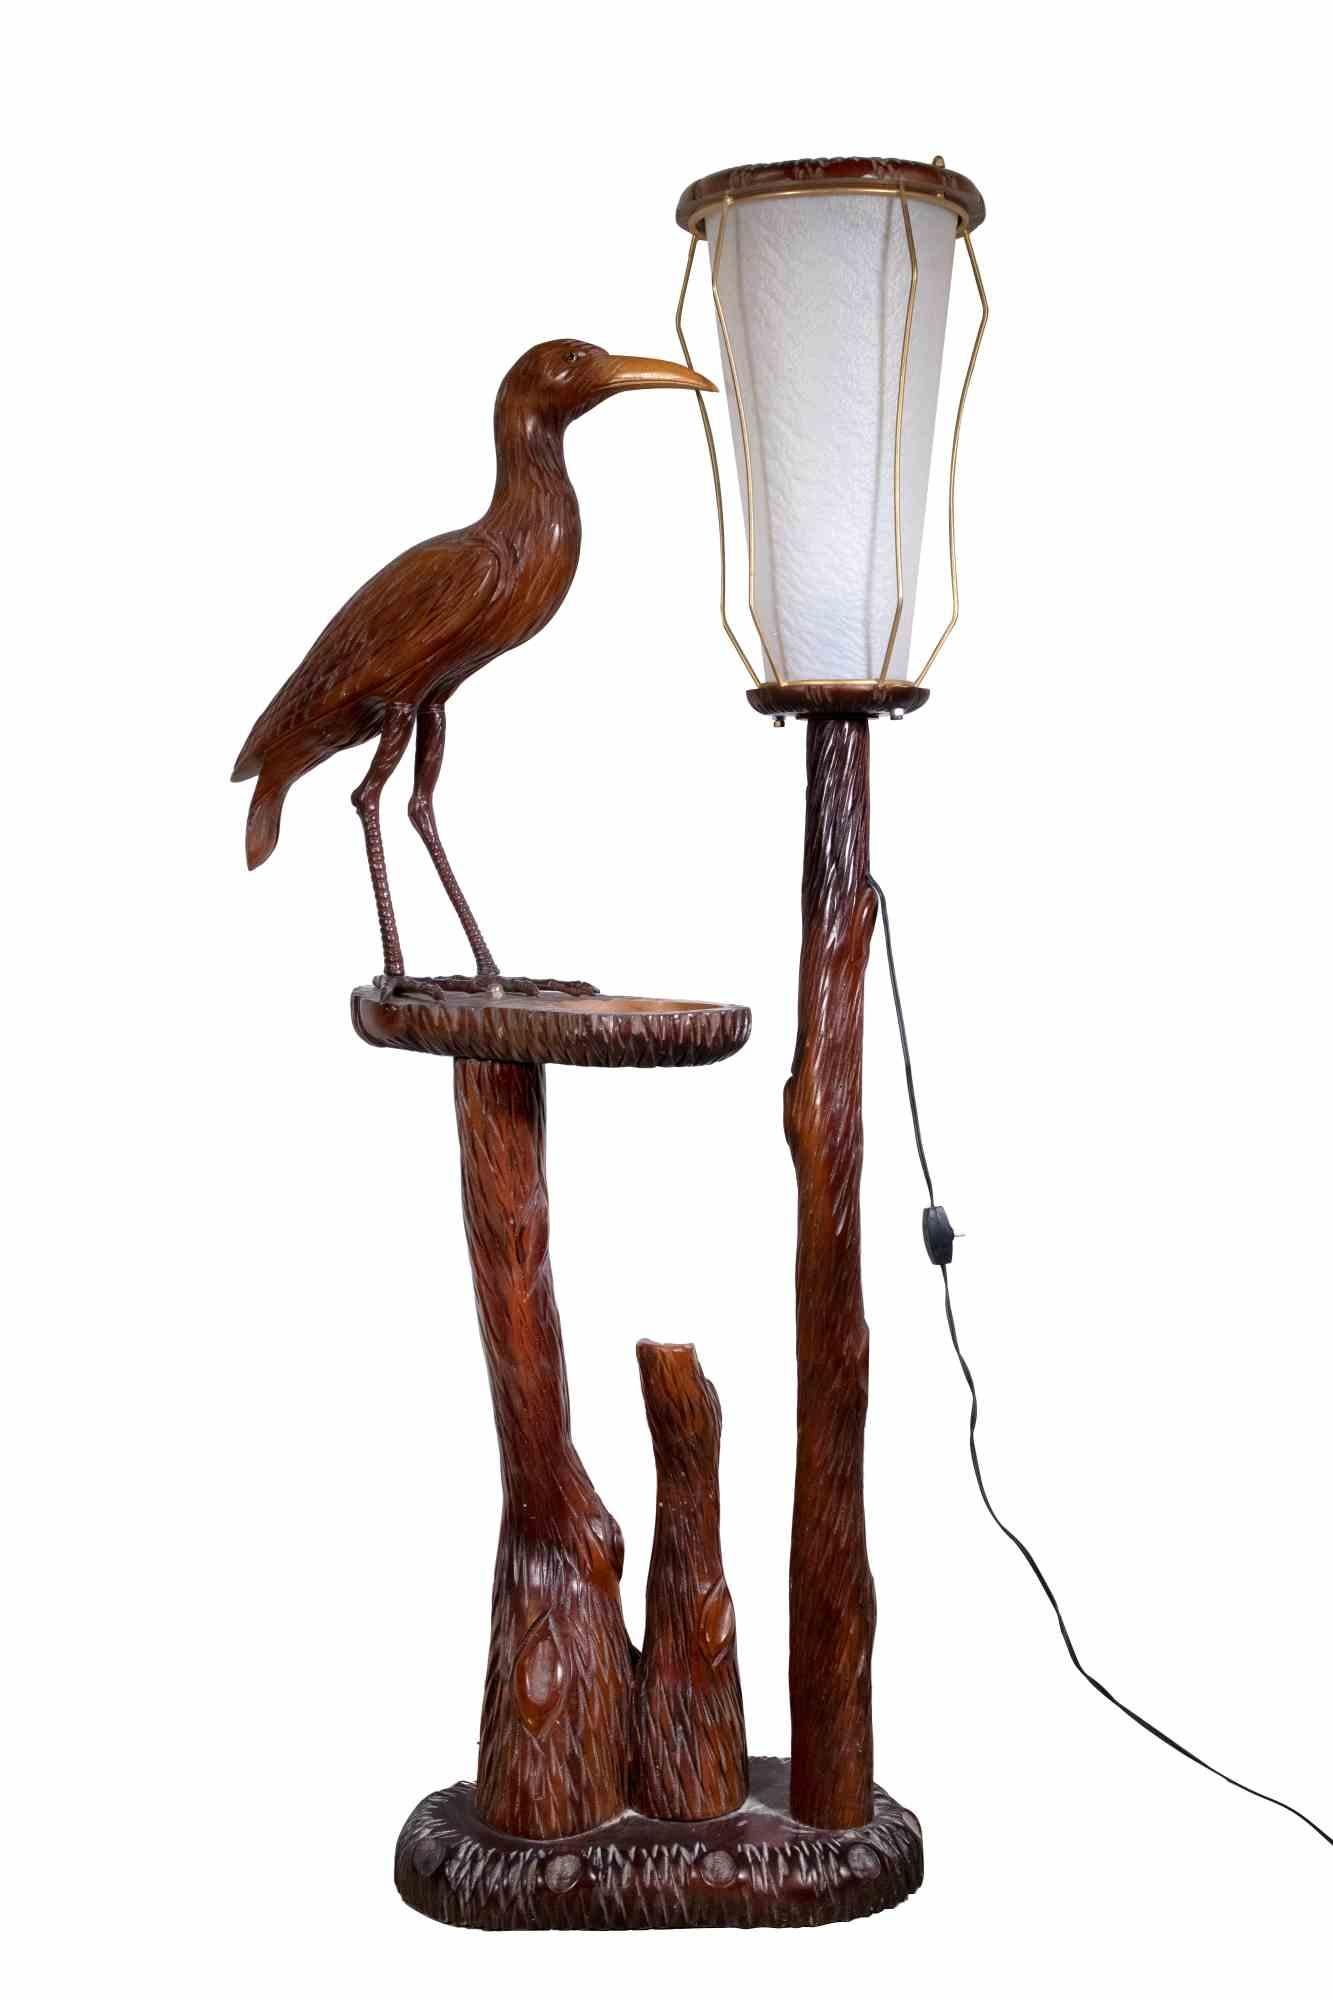 Vintage Wooden Lamp with Bird, Italian Lamp by Aldo Tura, Italy, 1950s For Sale